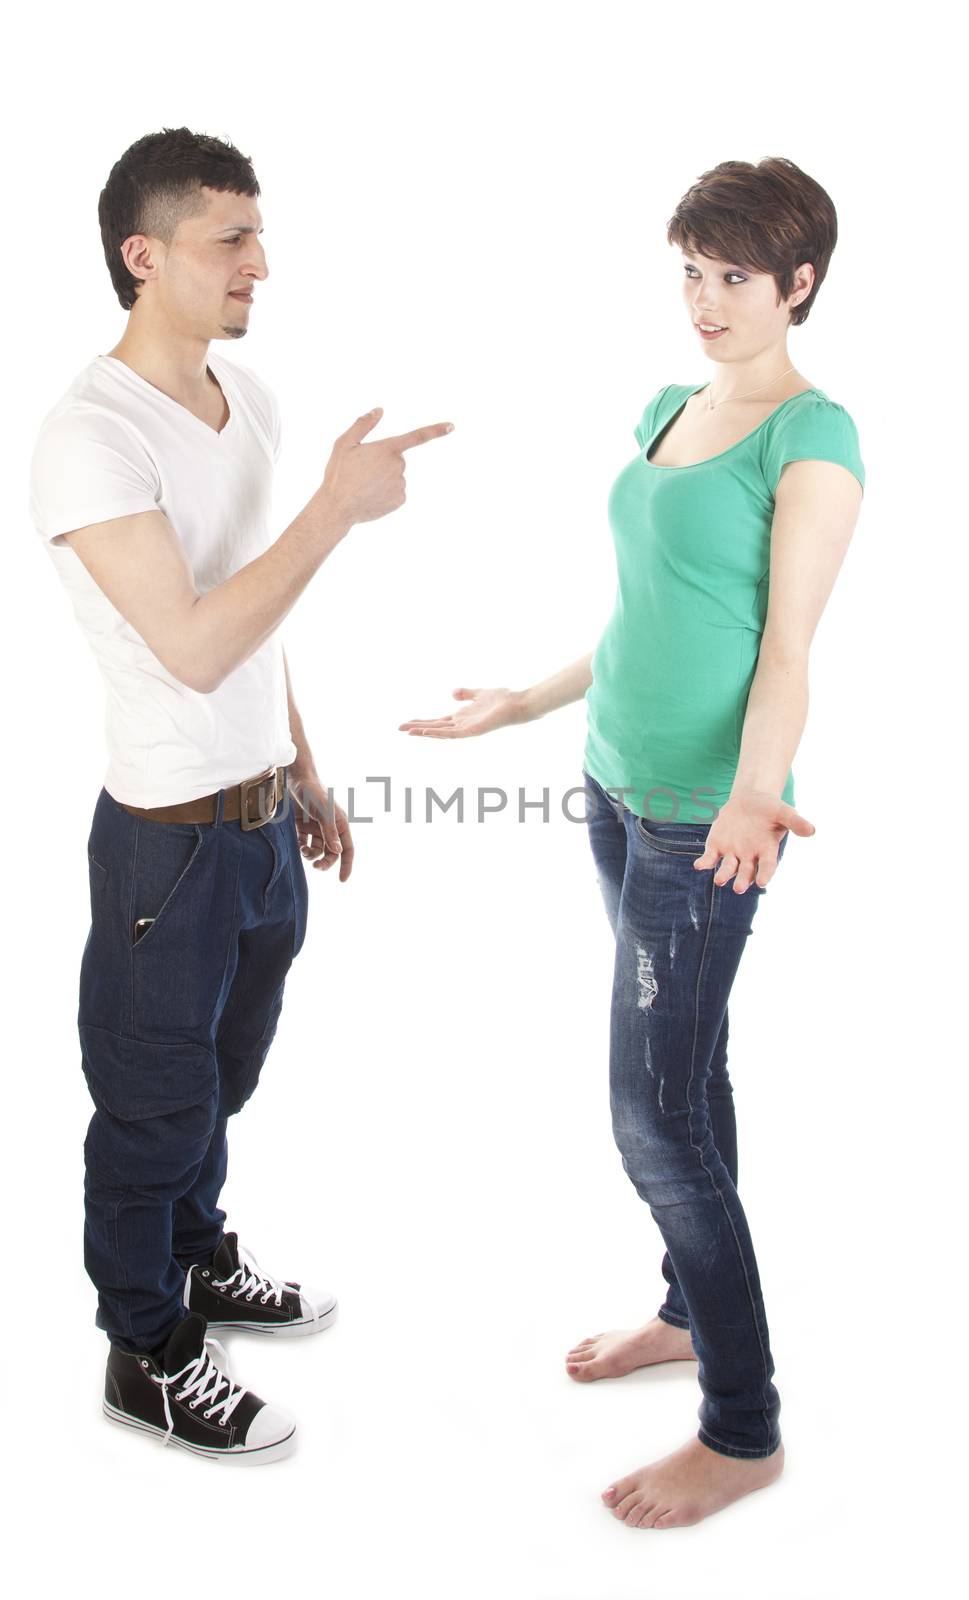 Man and woman having a argue isolated on white background by gigra